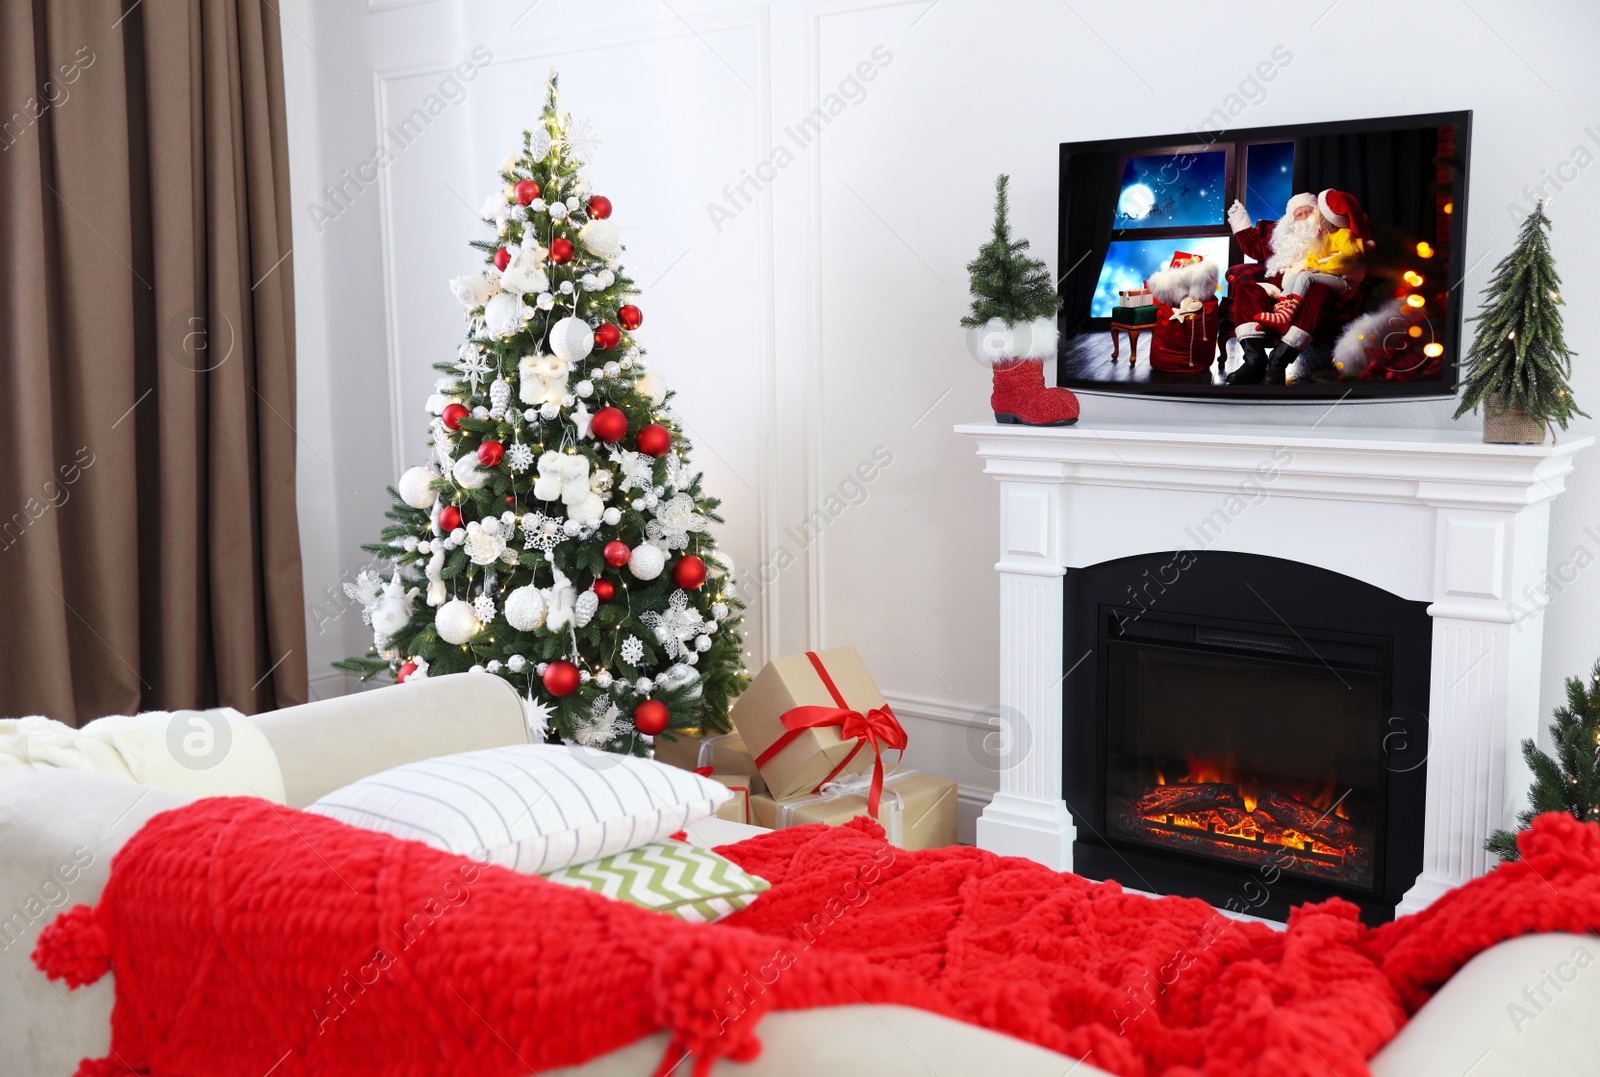 Image of Modern TV set on fireplace in room decorated for Christmas